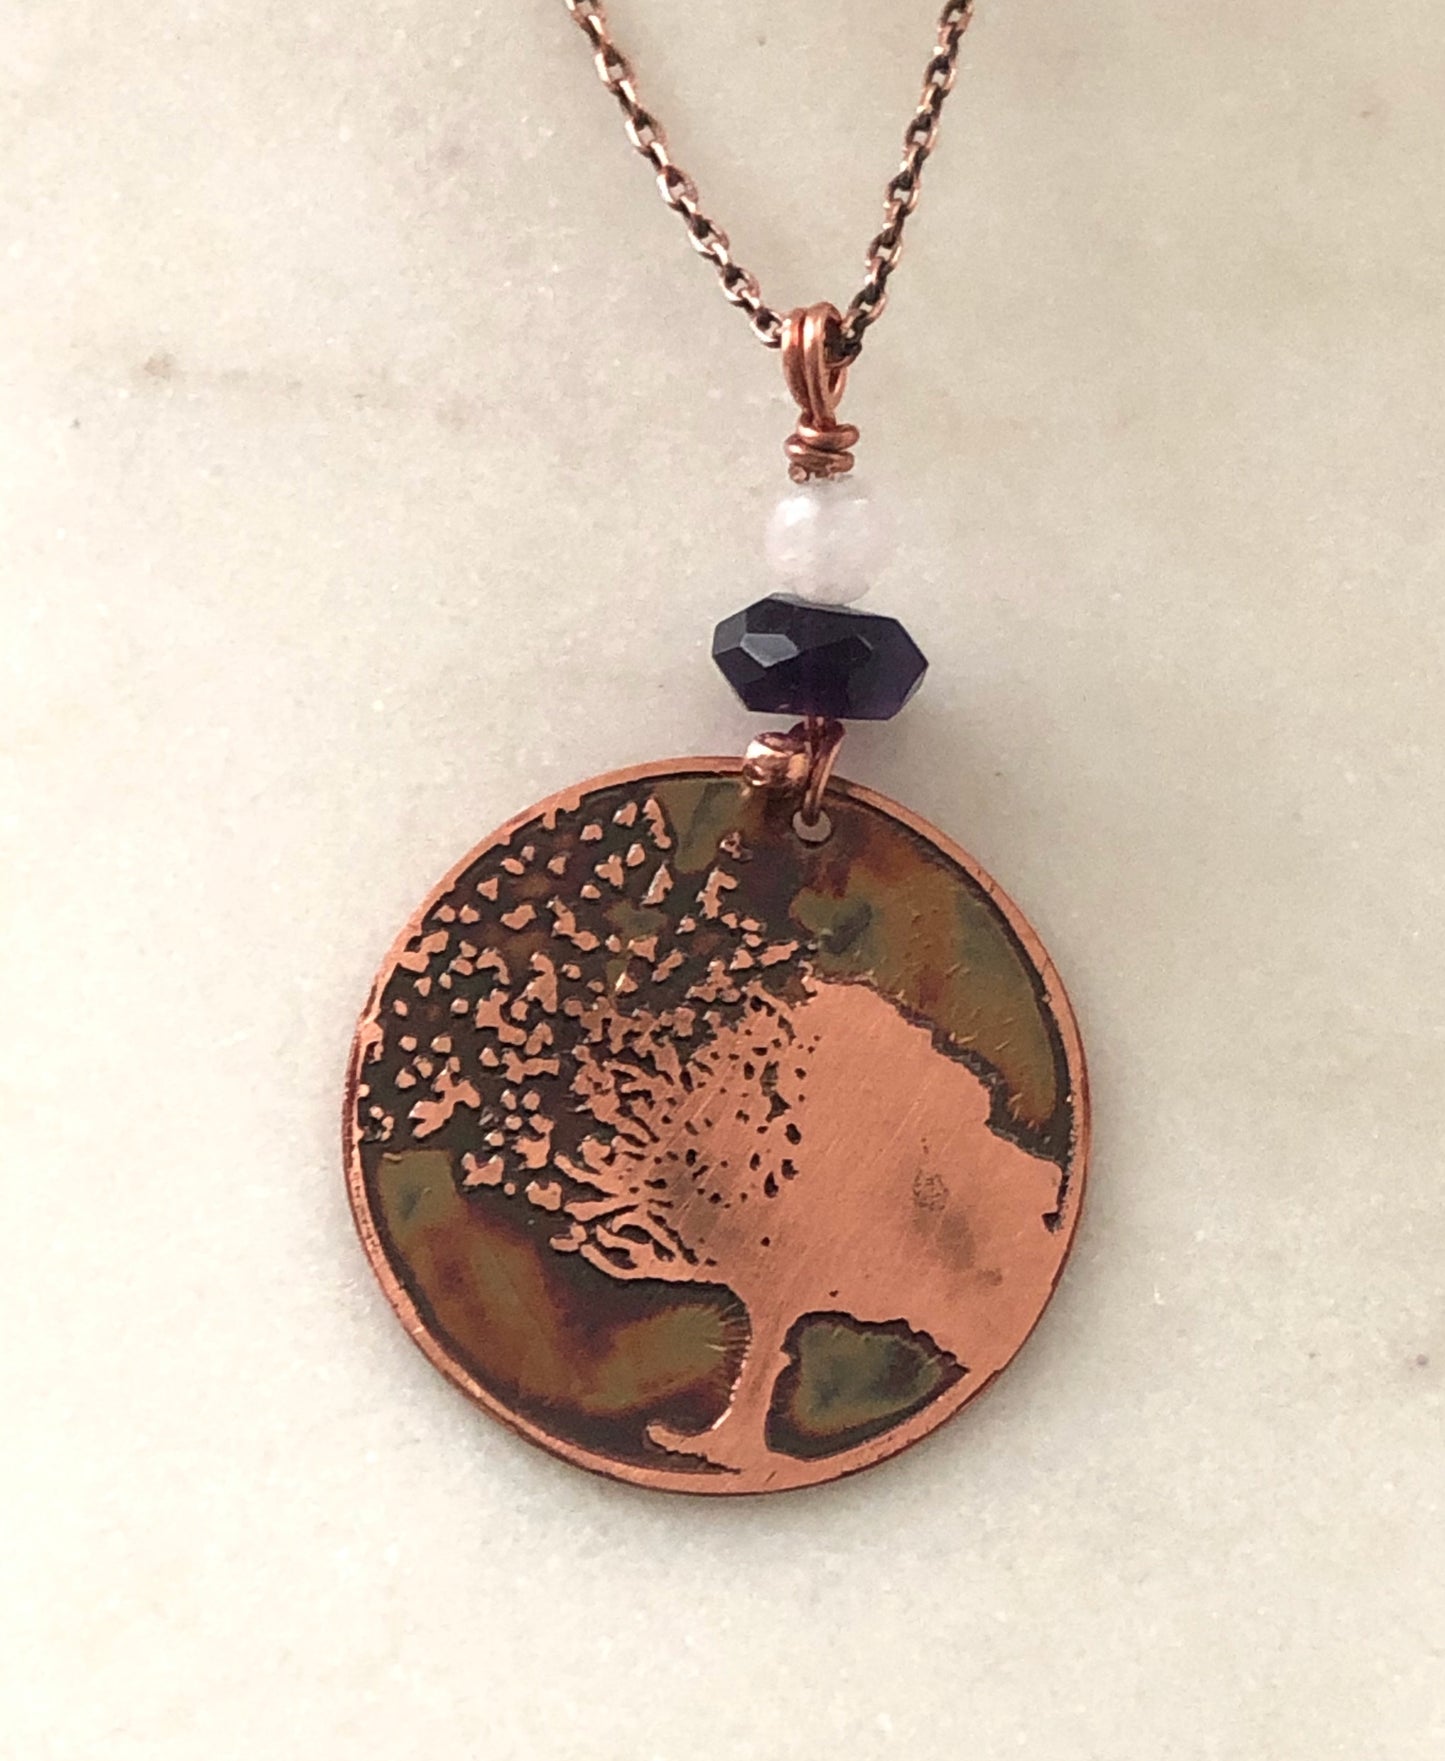 Acid etched copper blowing tree necklace with amethyst and moonstone